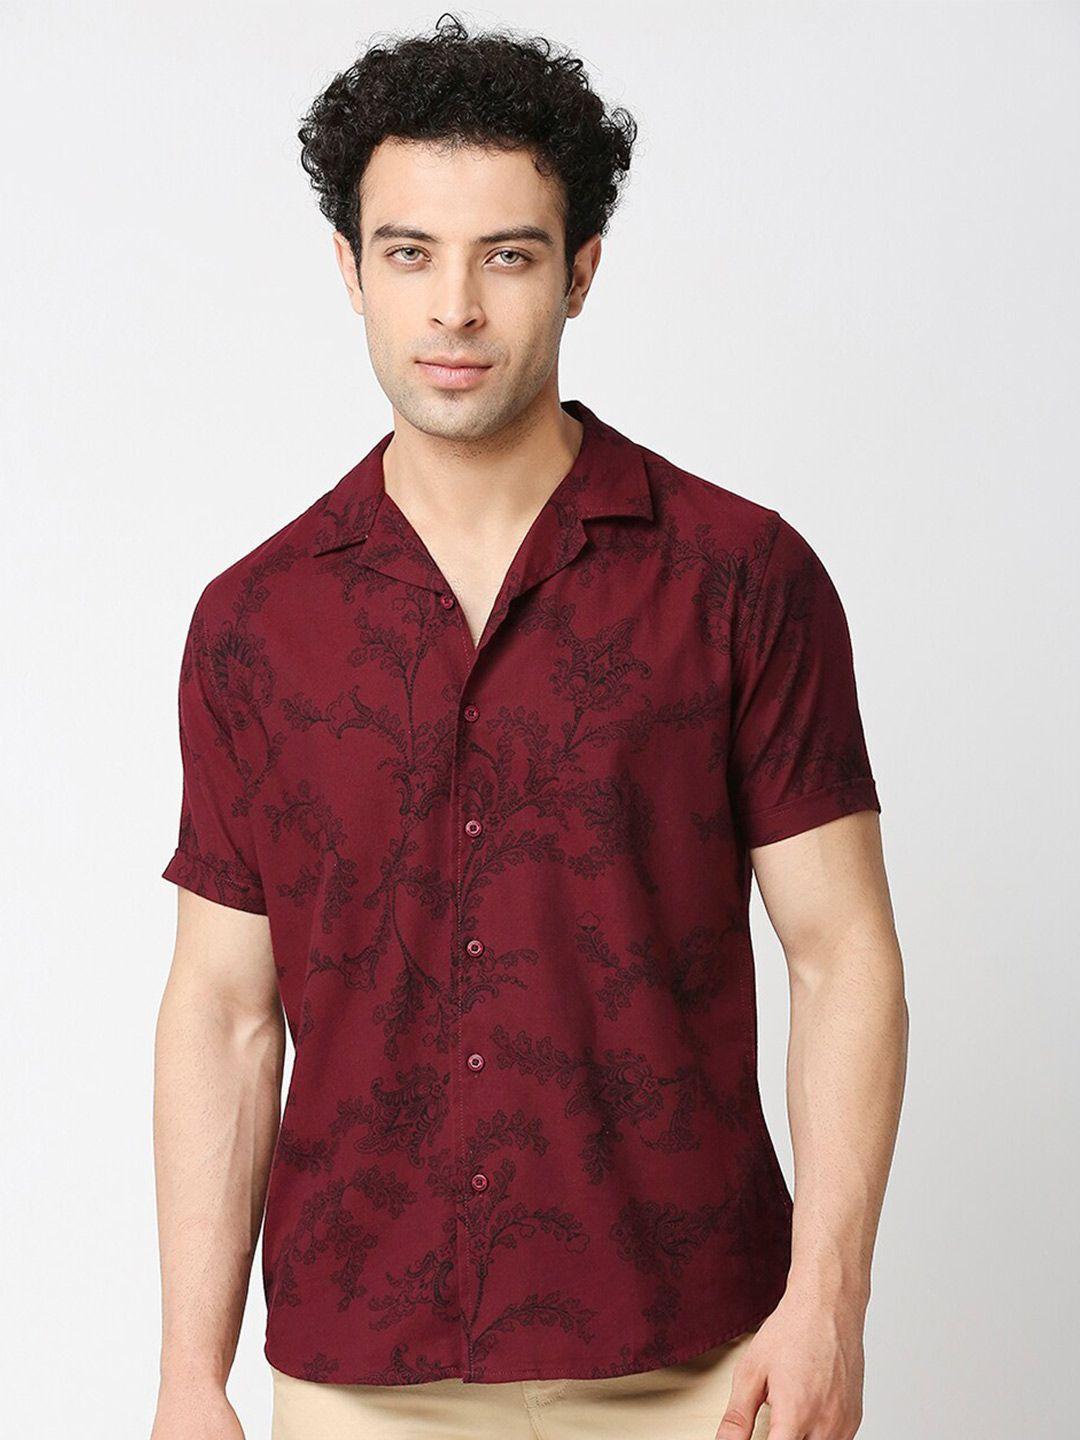 here&now-men-floral-printed-pure-cotton-slim-fit-casual-shirt